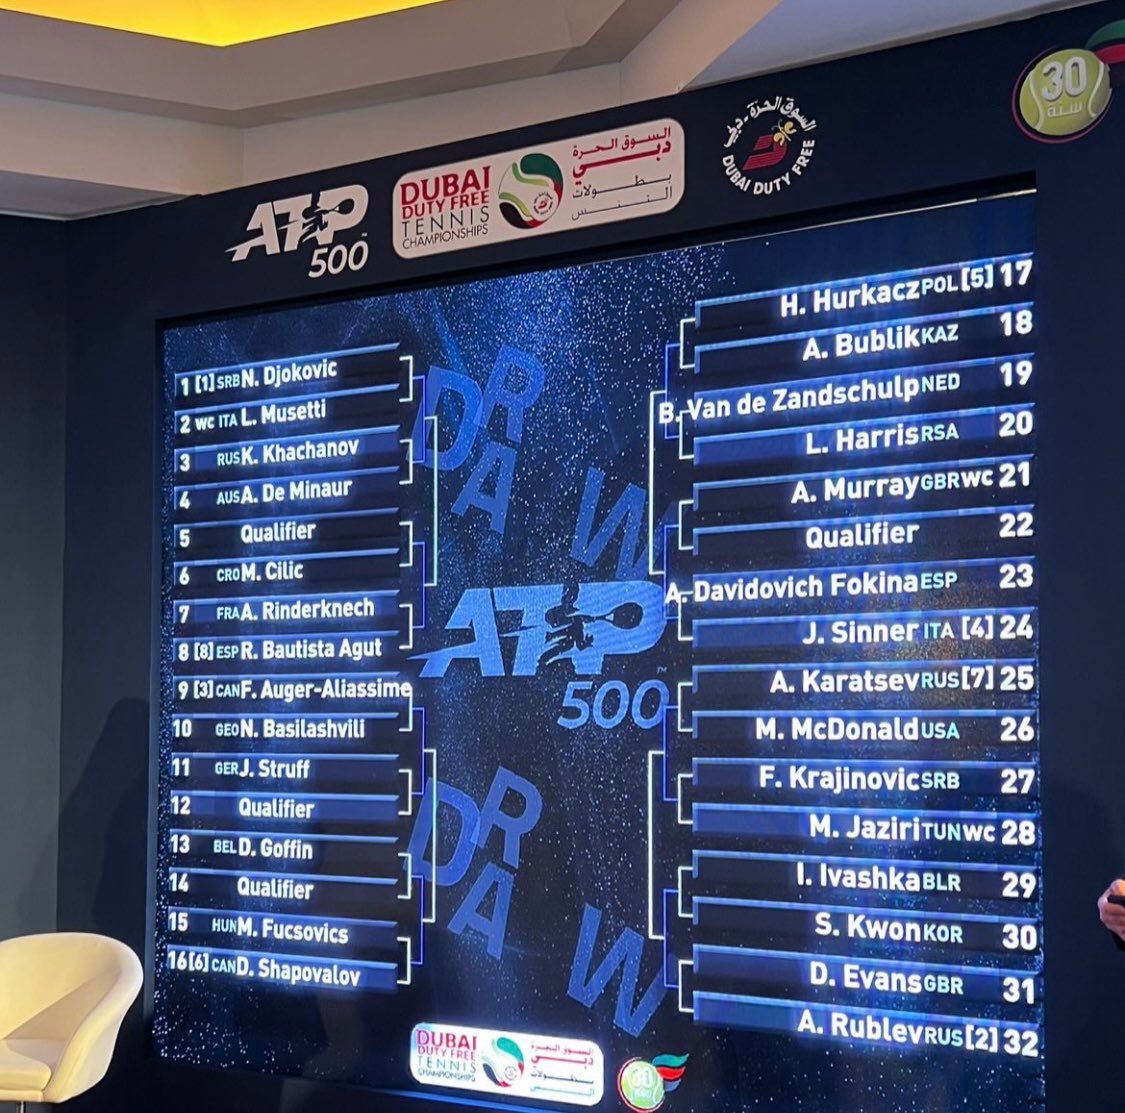 Dubai Tennis Championships 2022: Men's draw, schedule, players, prize money  and more